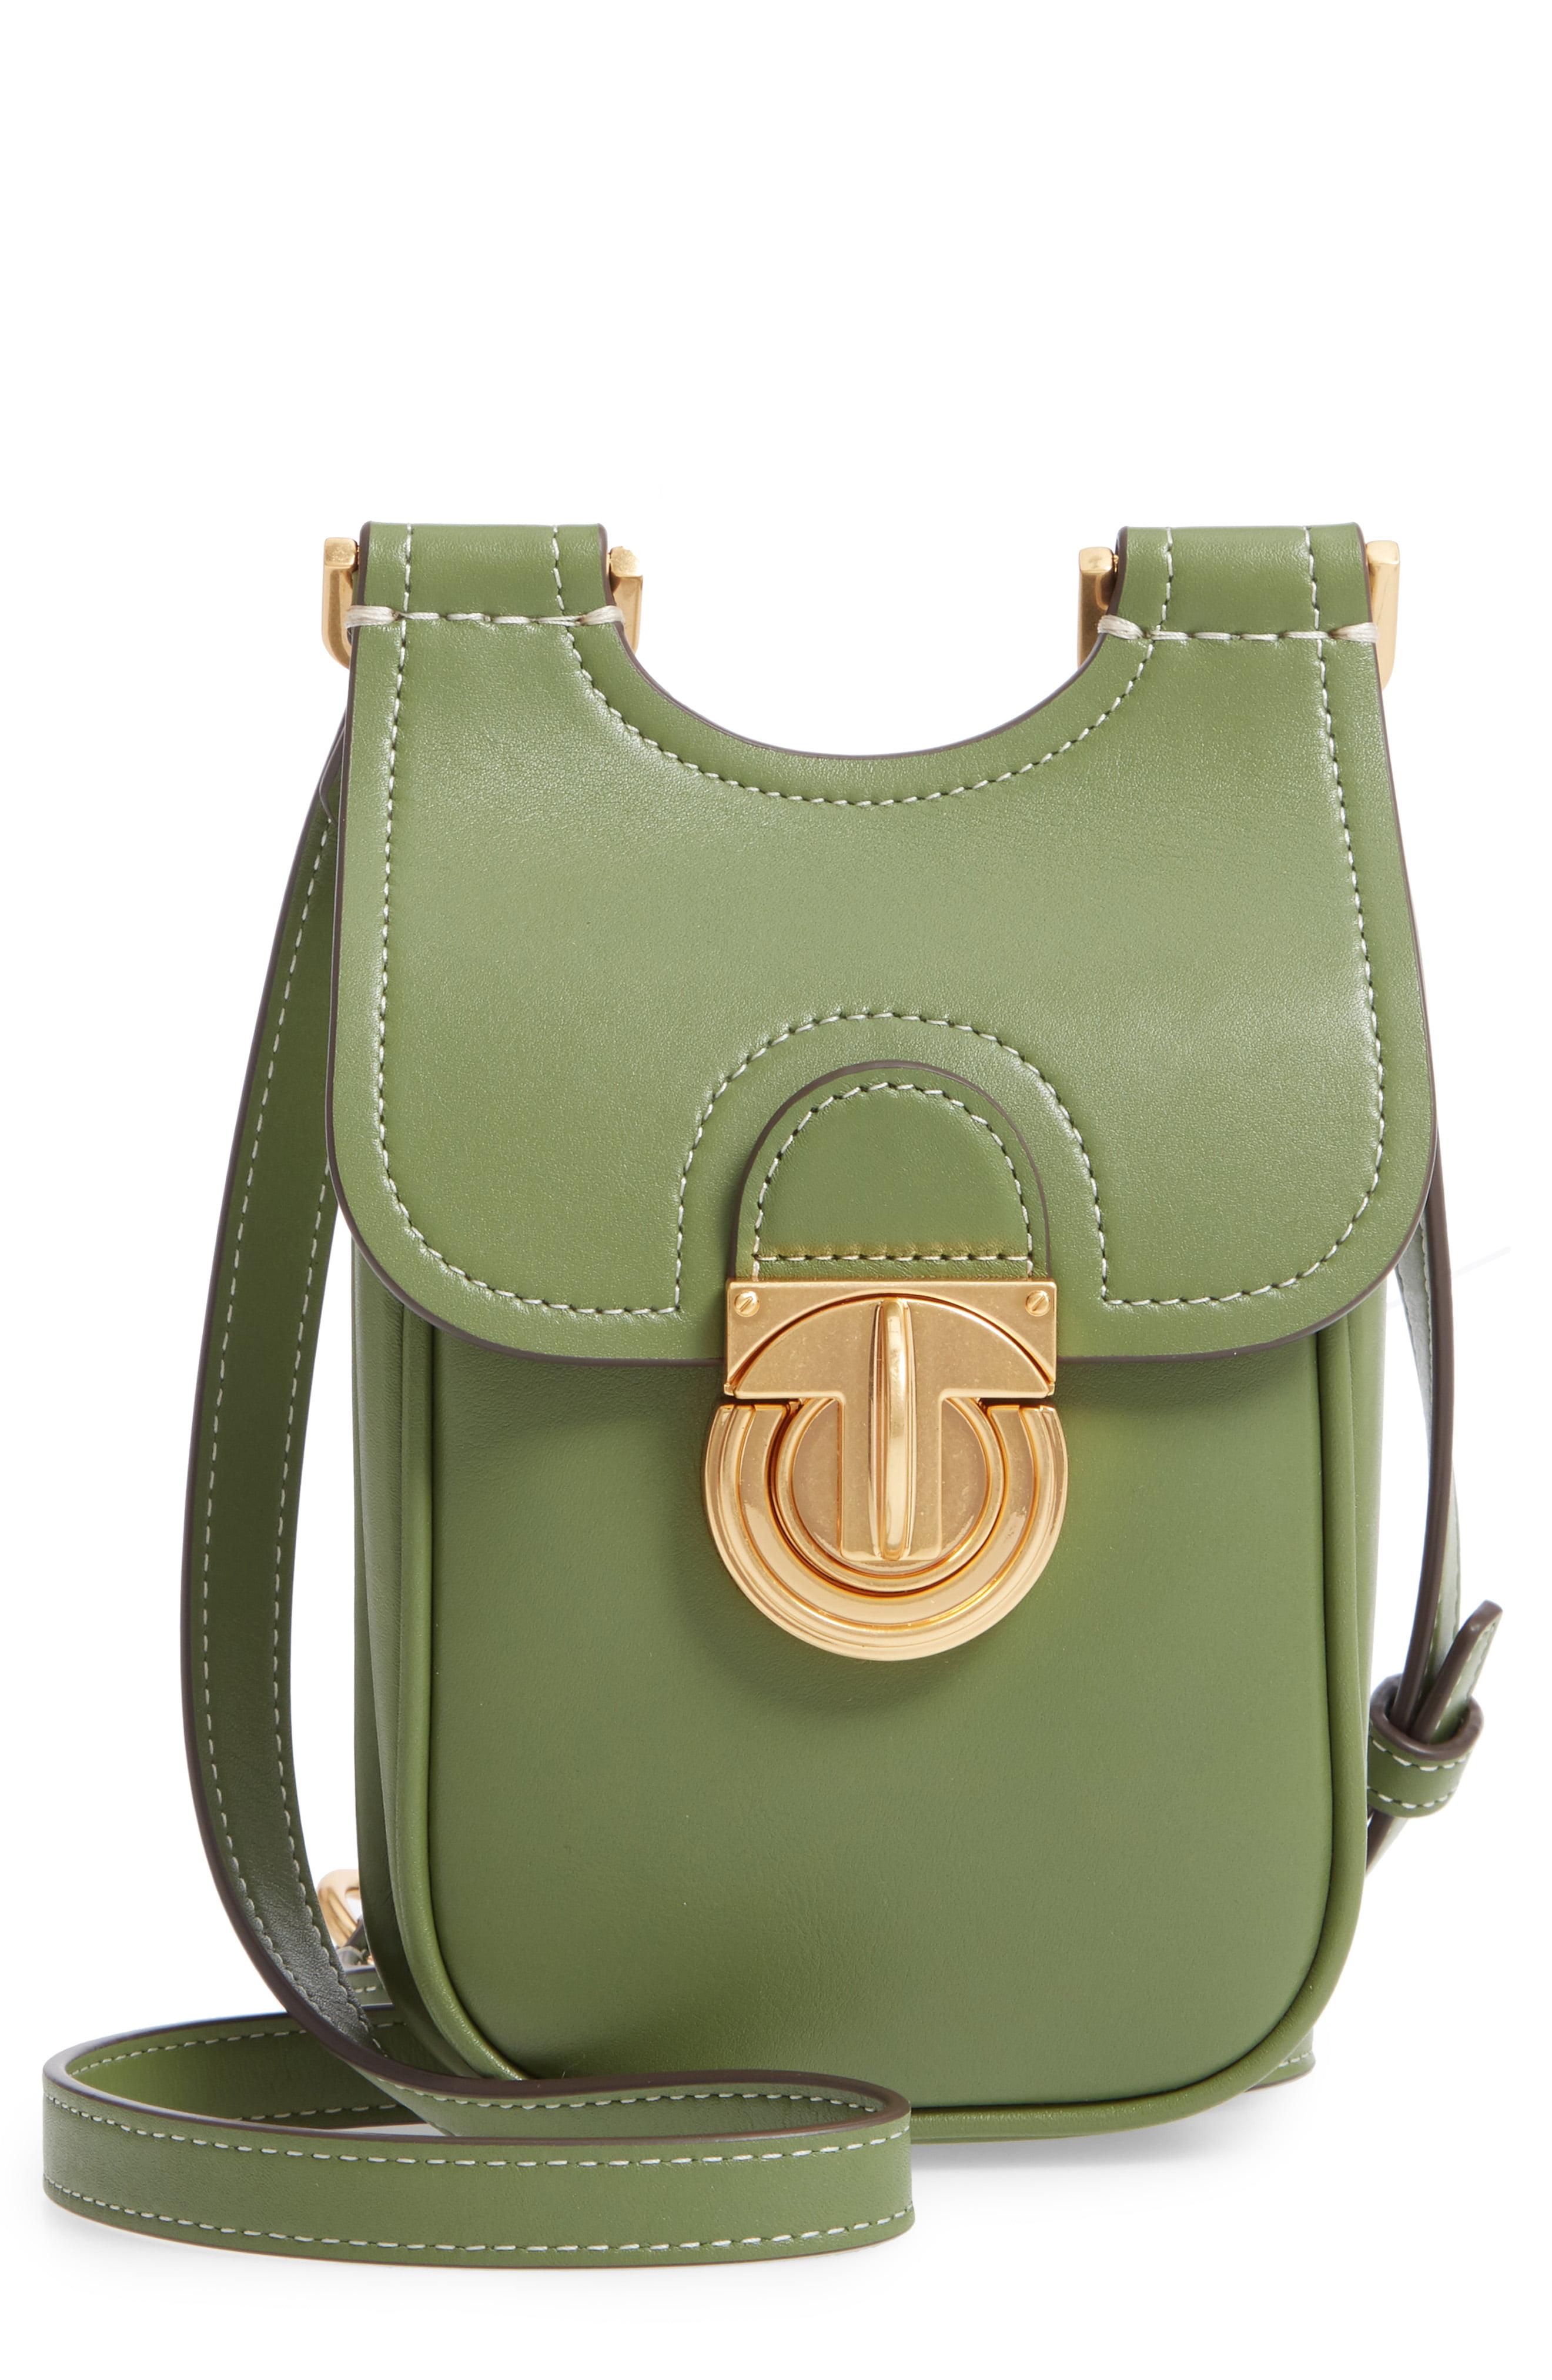 Lyst - Tory Burch James Leather Phone Crossbody Bag - in Green